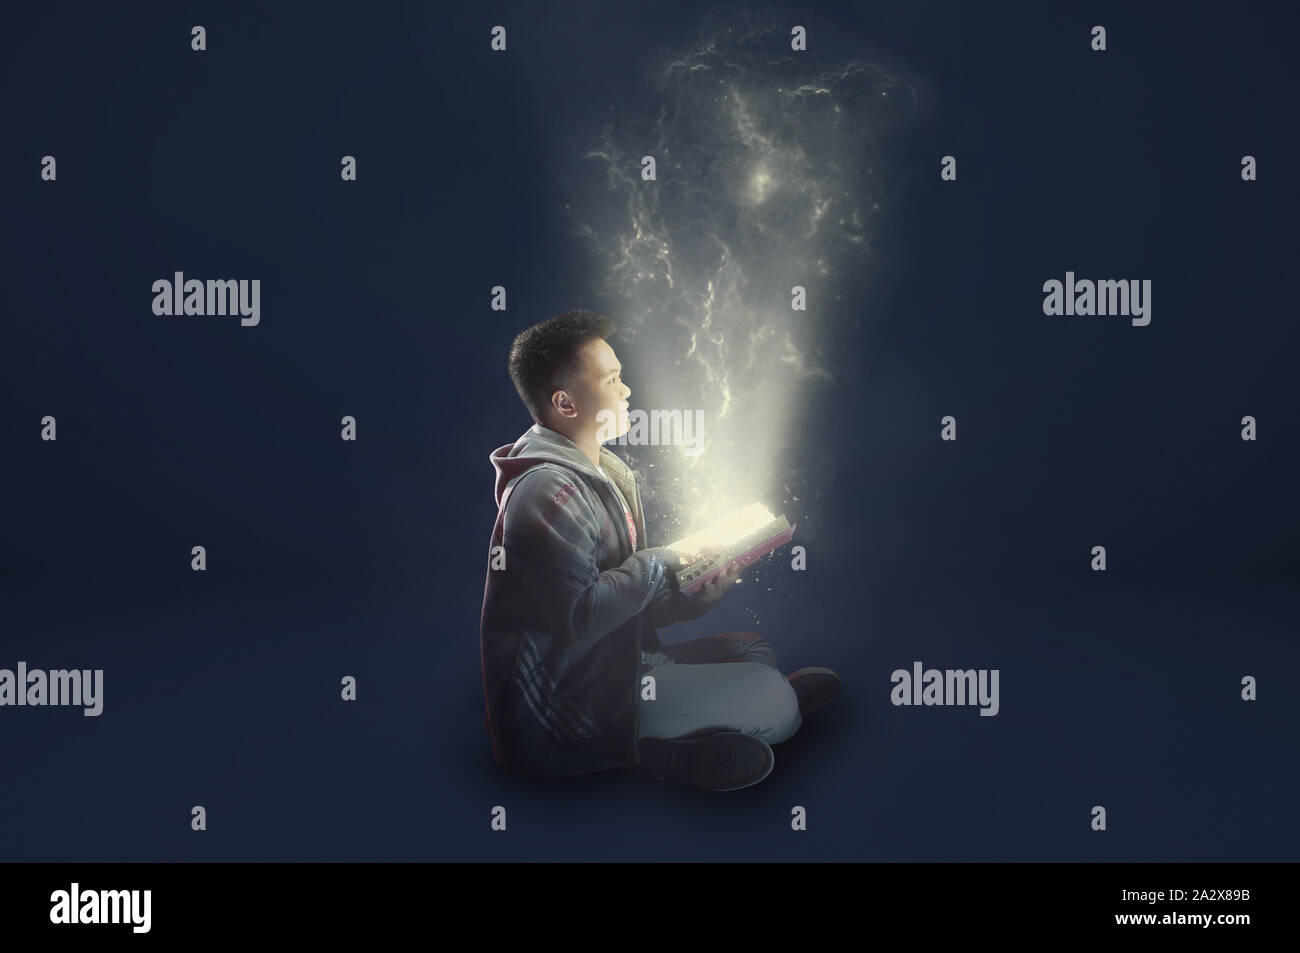 A school boy wearing a jacket holding and reading a magical book with mystical light coming out. Ideas from reading. Depicting education. Stock Photo